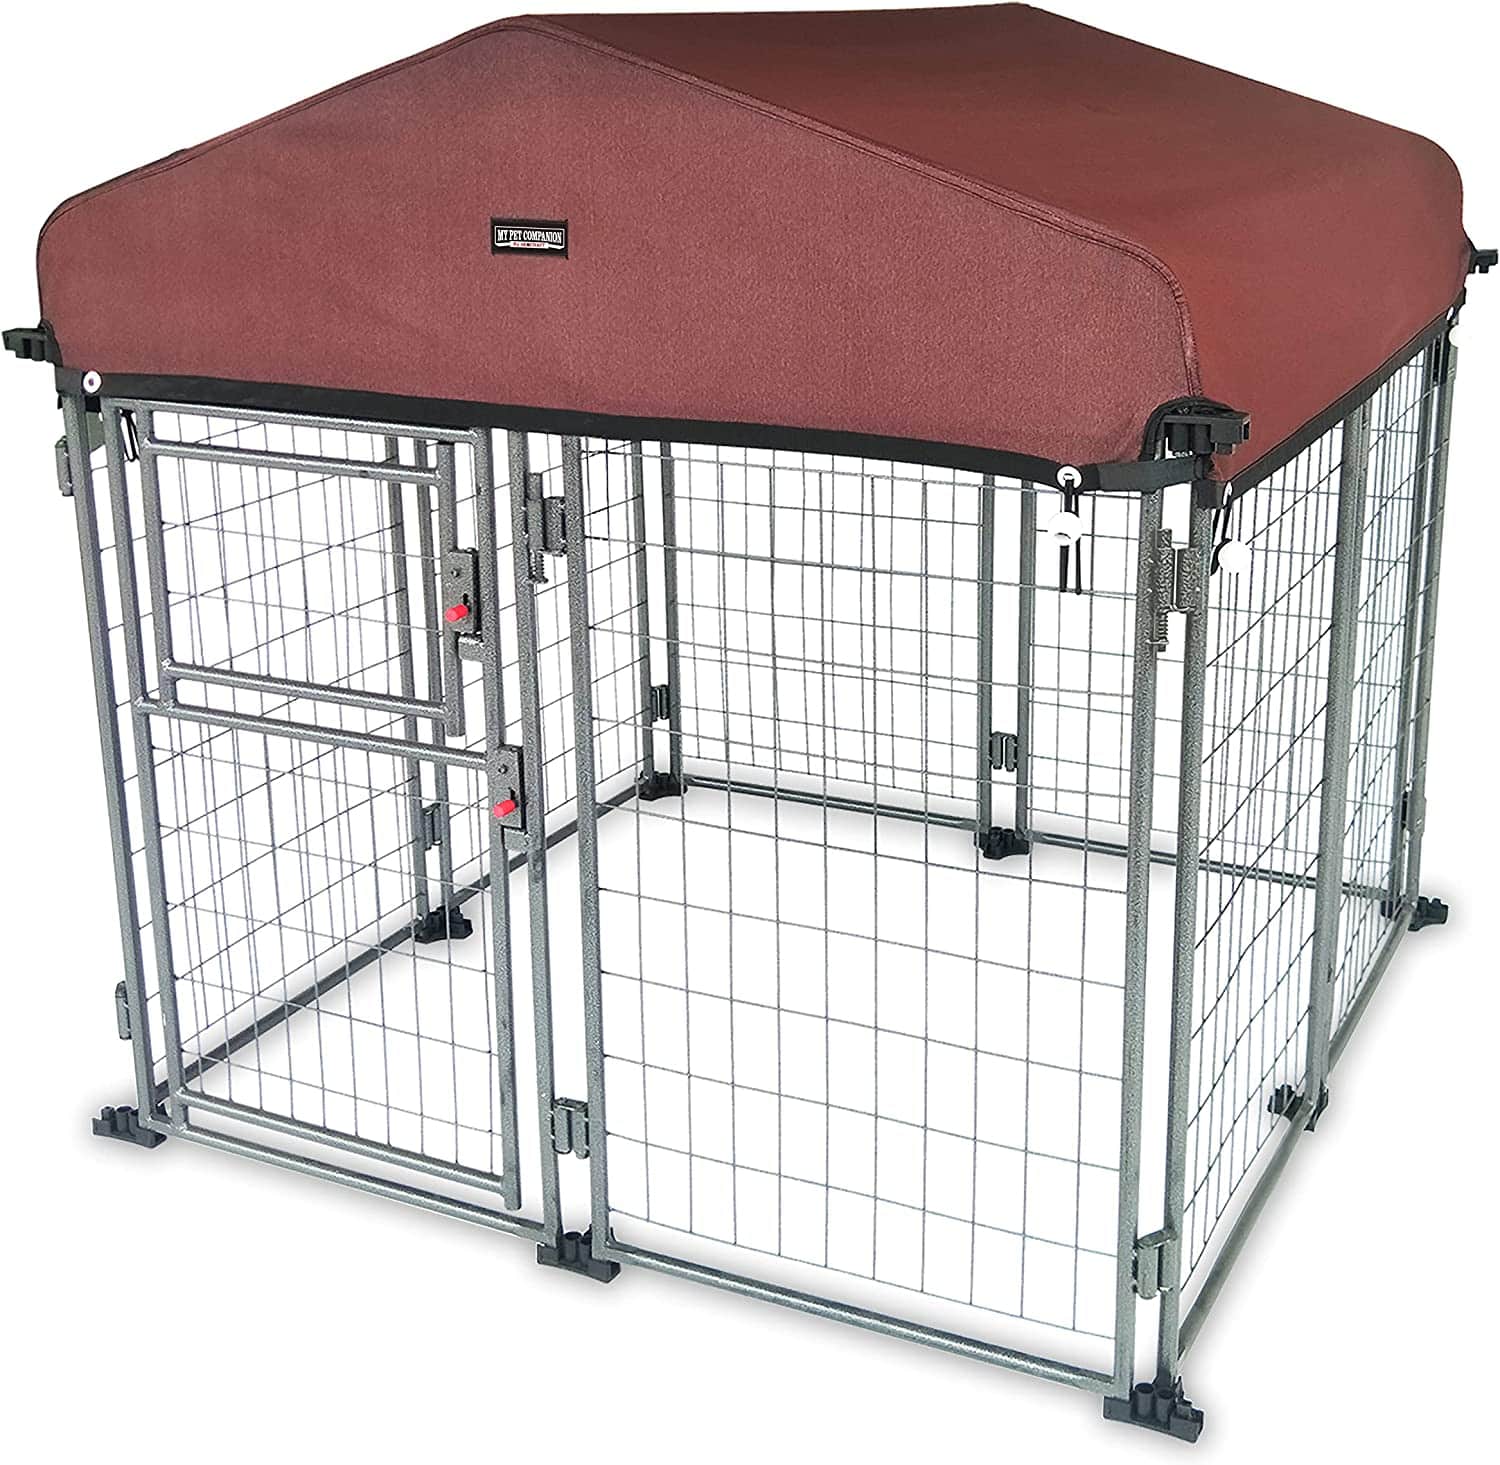 Neocraft My Pet Companion Dog Kennel with Roof Cover 